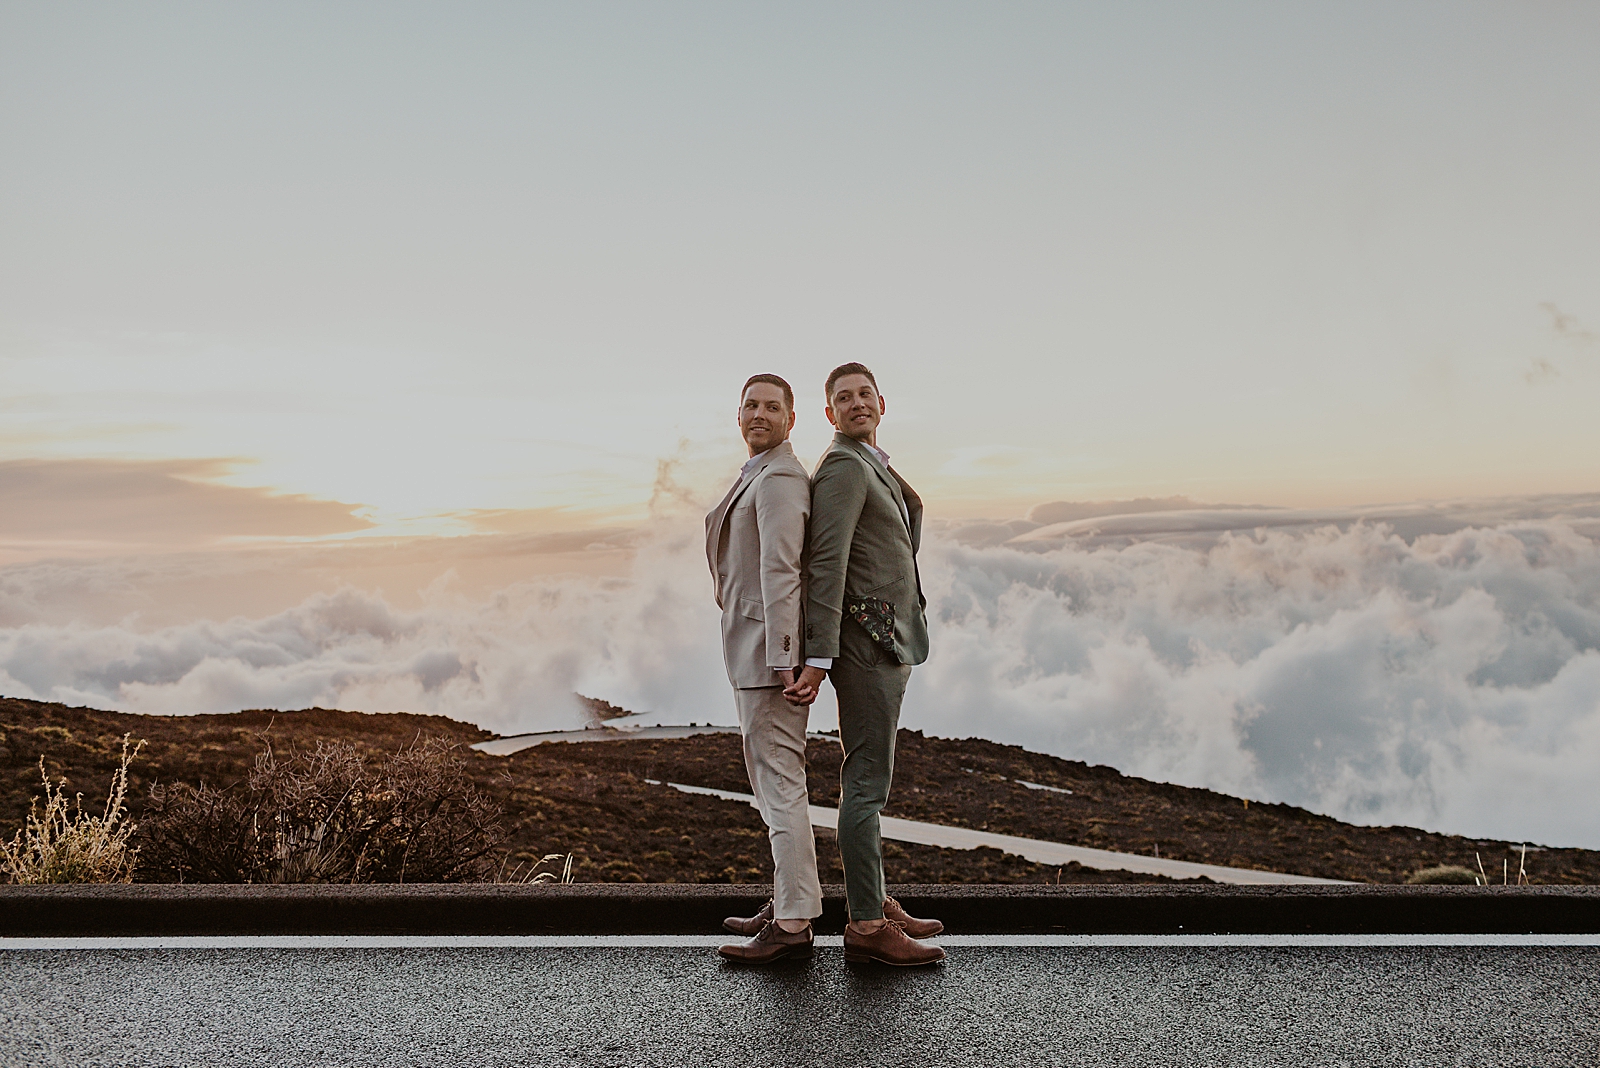 Grooms back to back standing on mountain road with view of the top of the clouds